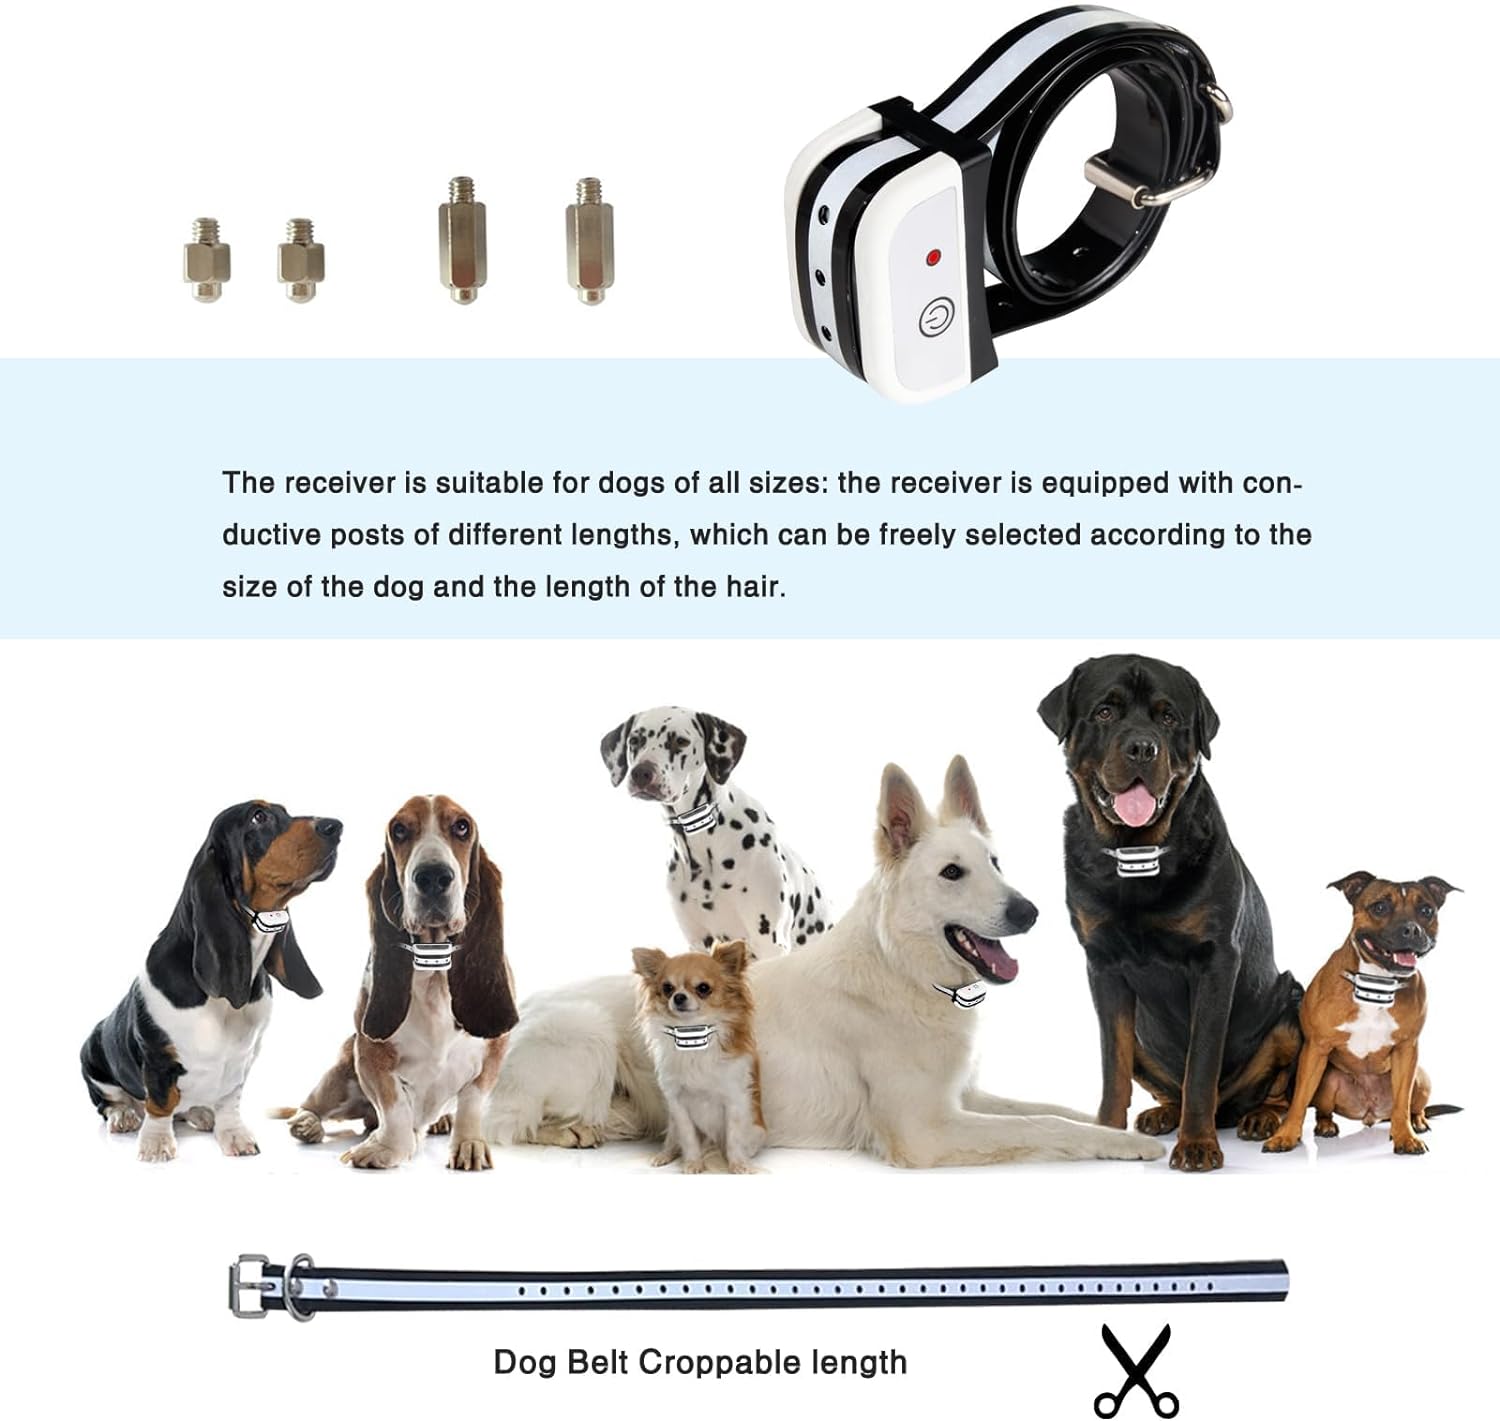 JUSTPET Wireless Dog Fence Electric Pet Containment System, Adjustable Control Range 100 to 990 Feet, Safe Effective No Randomly Over Correction, Rechargeable Waterproof Collar Receiver